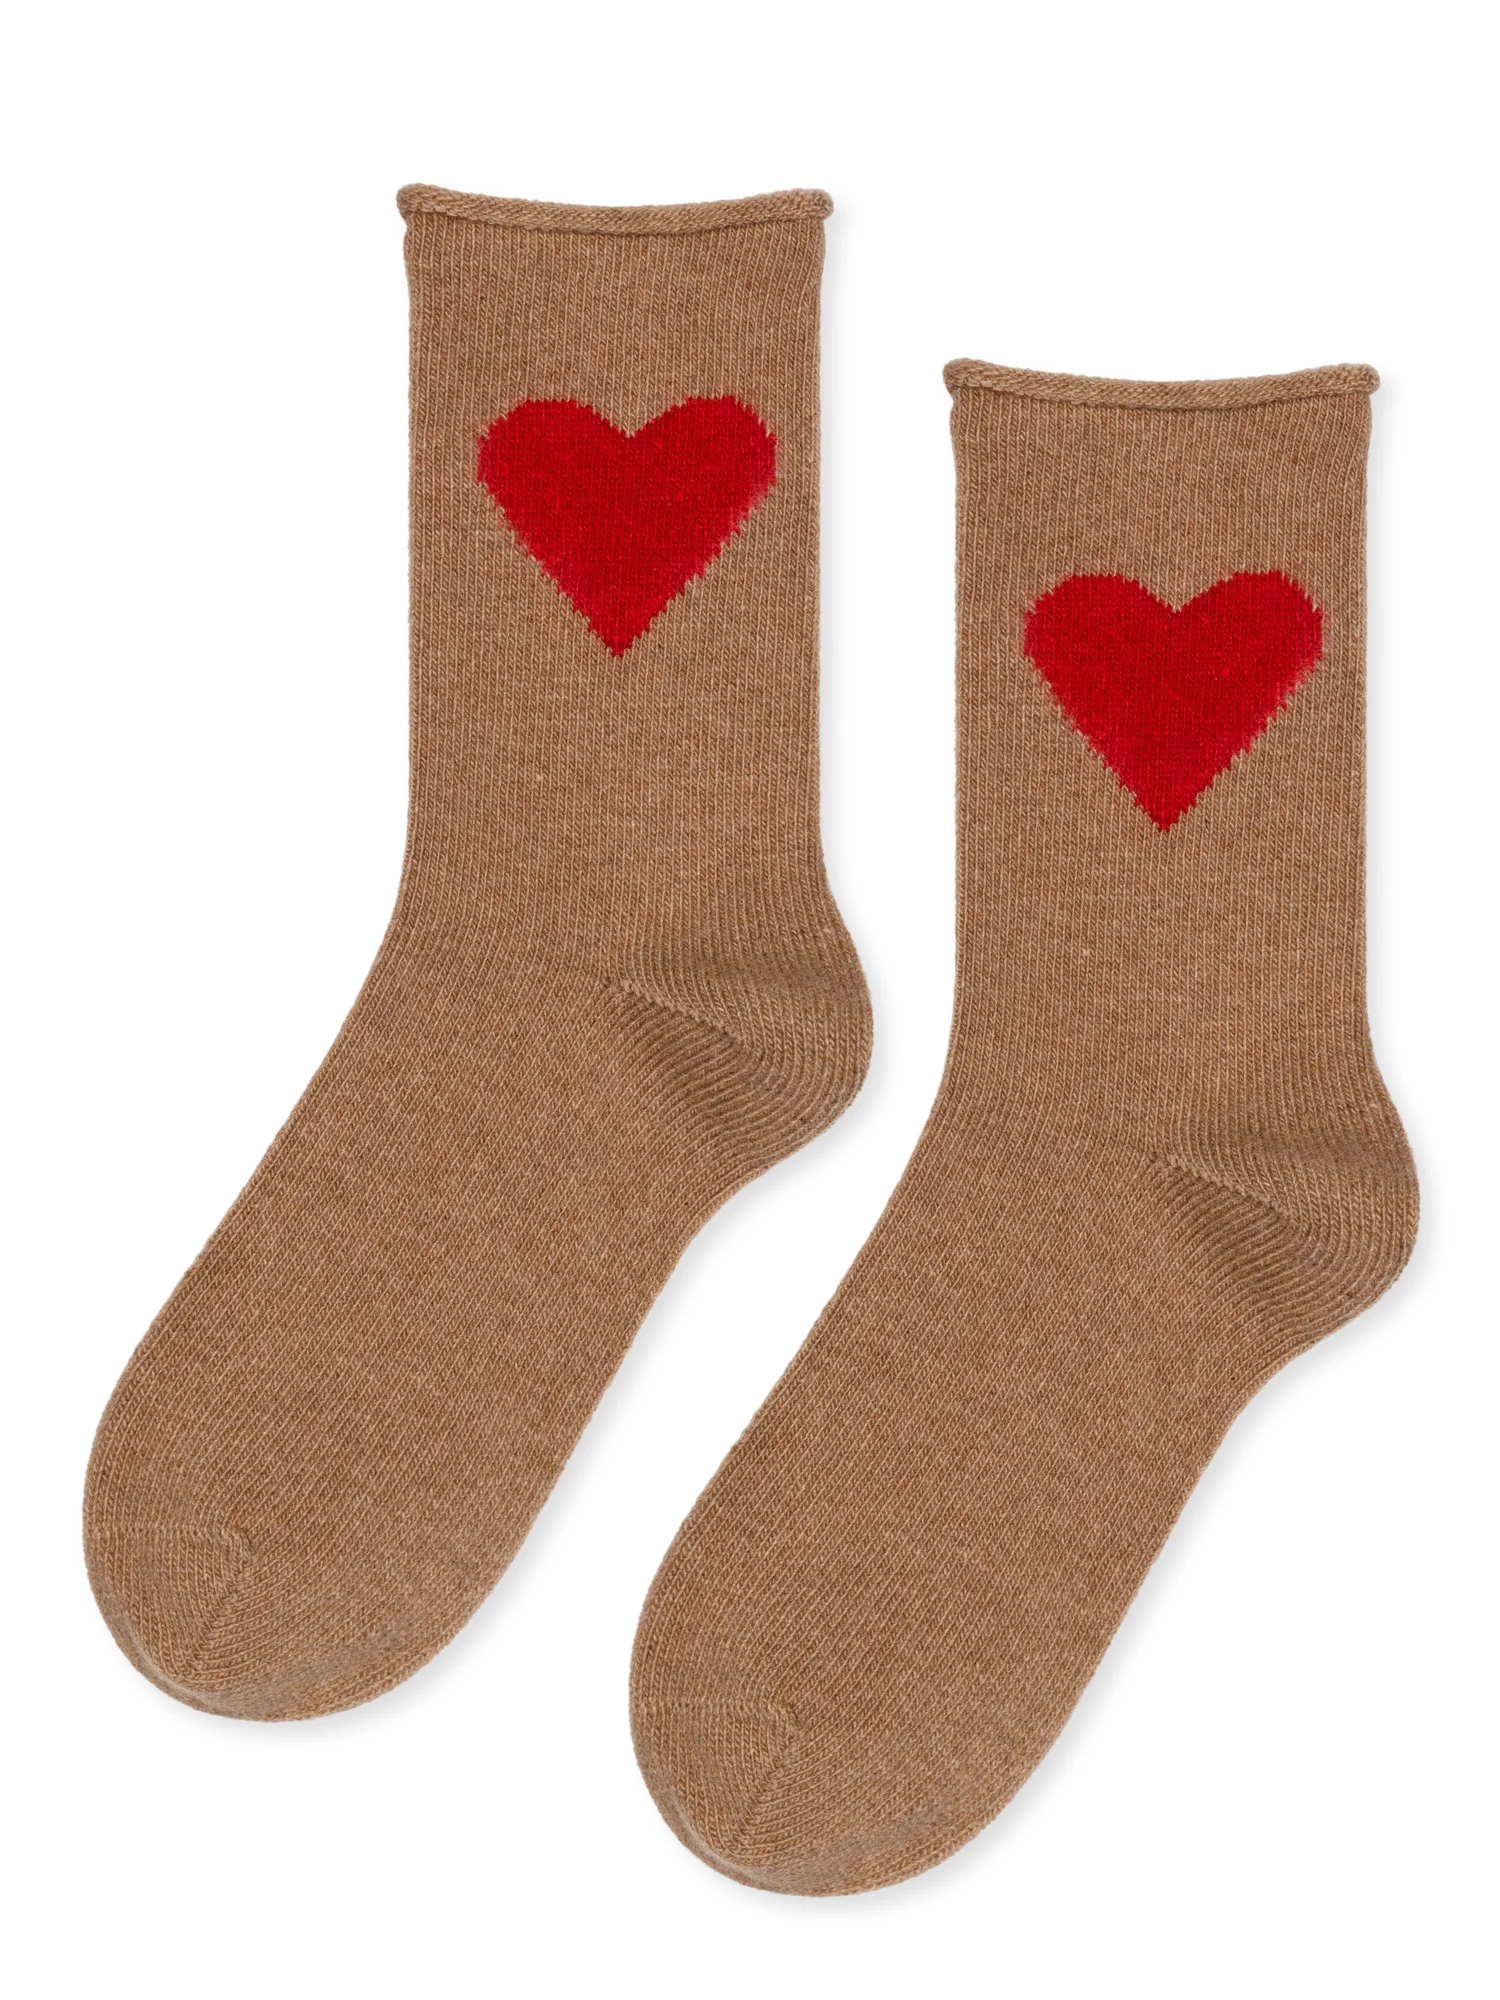 pair of tan cashmere socks that are laid flat. A big red heart is shown on the side and the top of the sock has a slight rolled look